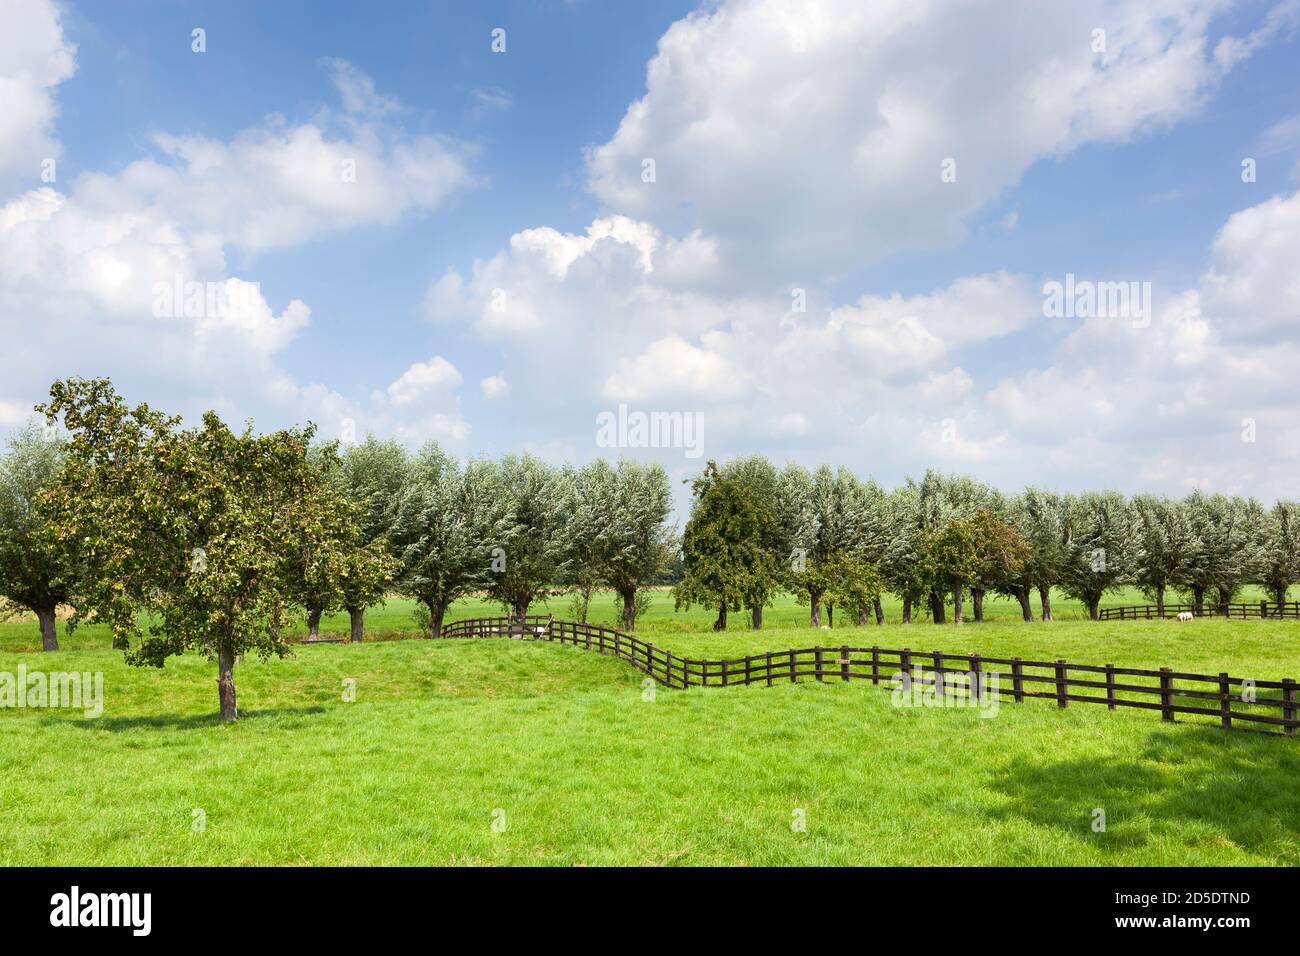 Dutch rural grass landscape with a wooden fence and a pear tree in Meerkerk in the Netherlands Stock Photo